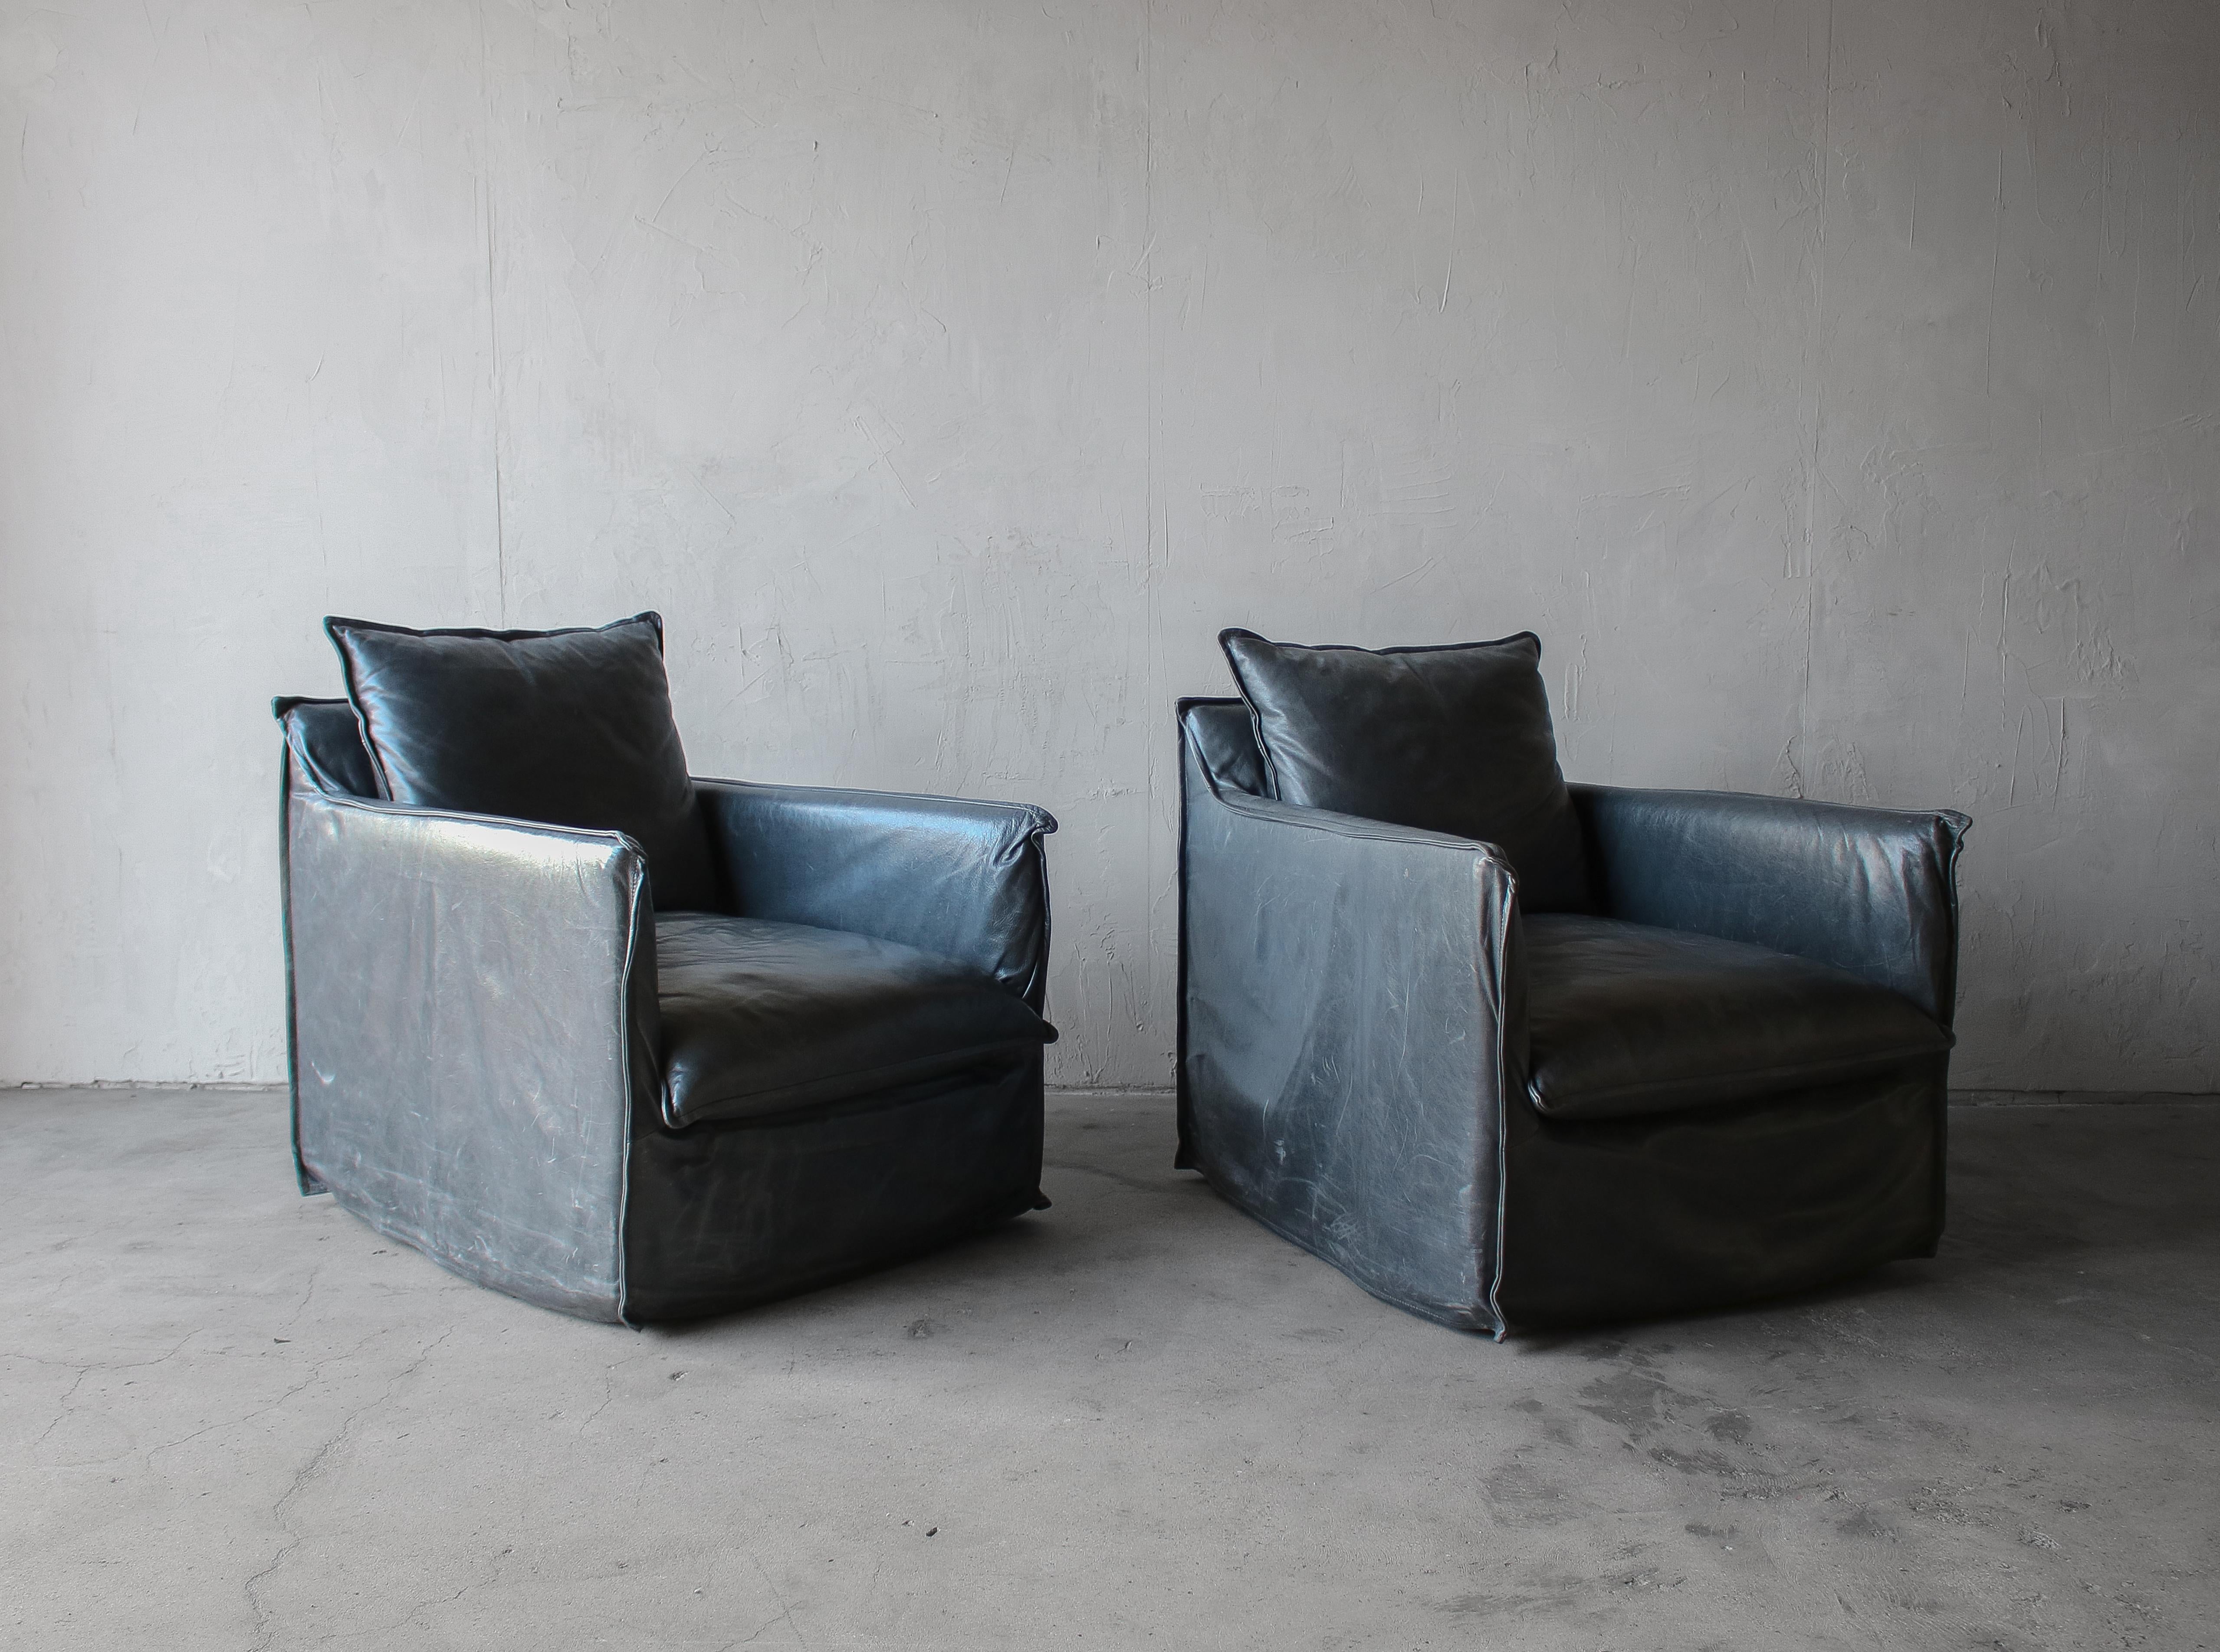 Nice pair of leather swivel chairs.  Chairs feature a unique leather slipcover giving them a real welcoming, sacky feel.  Leather is butter soft in a dark smokey blue, a real cross between navy and charcoal.  Extra deep and extra